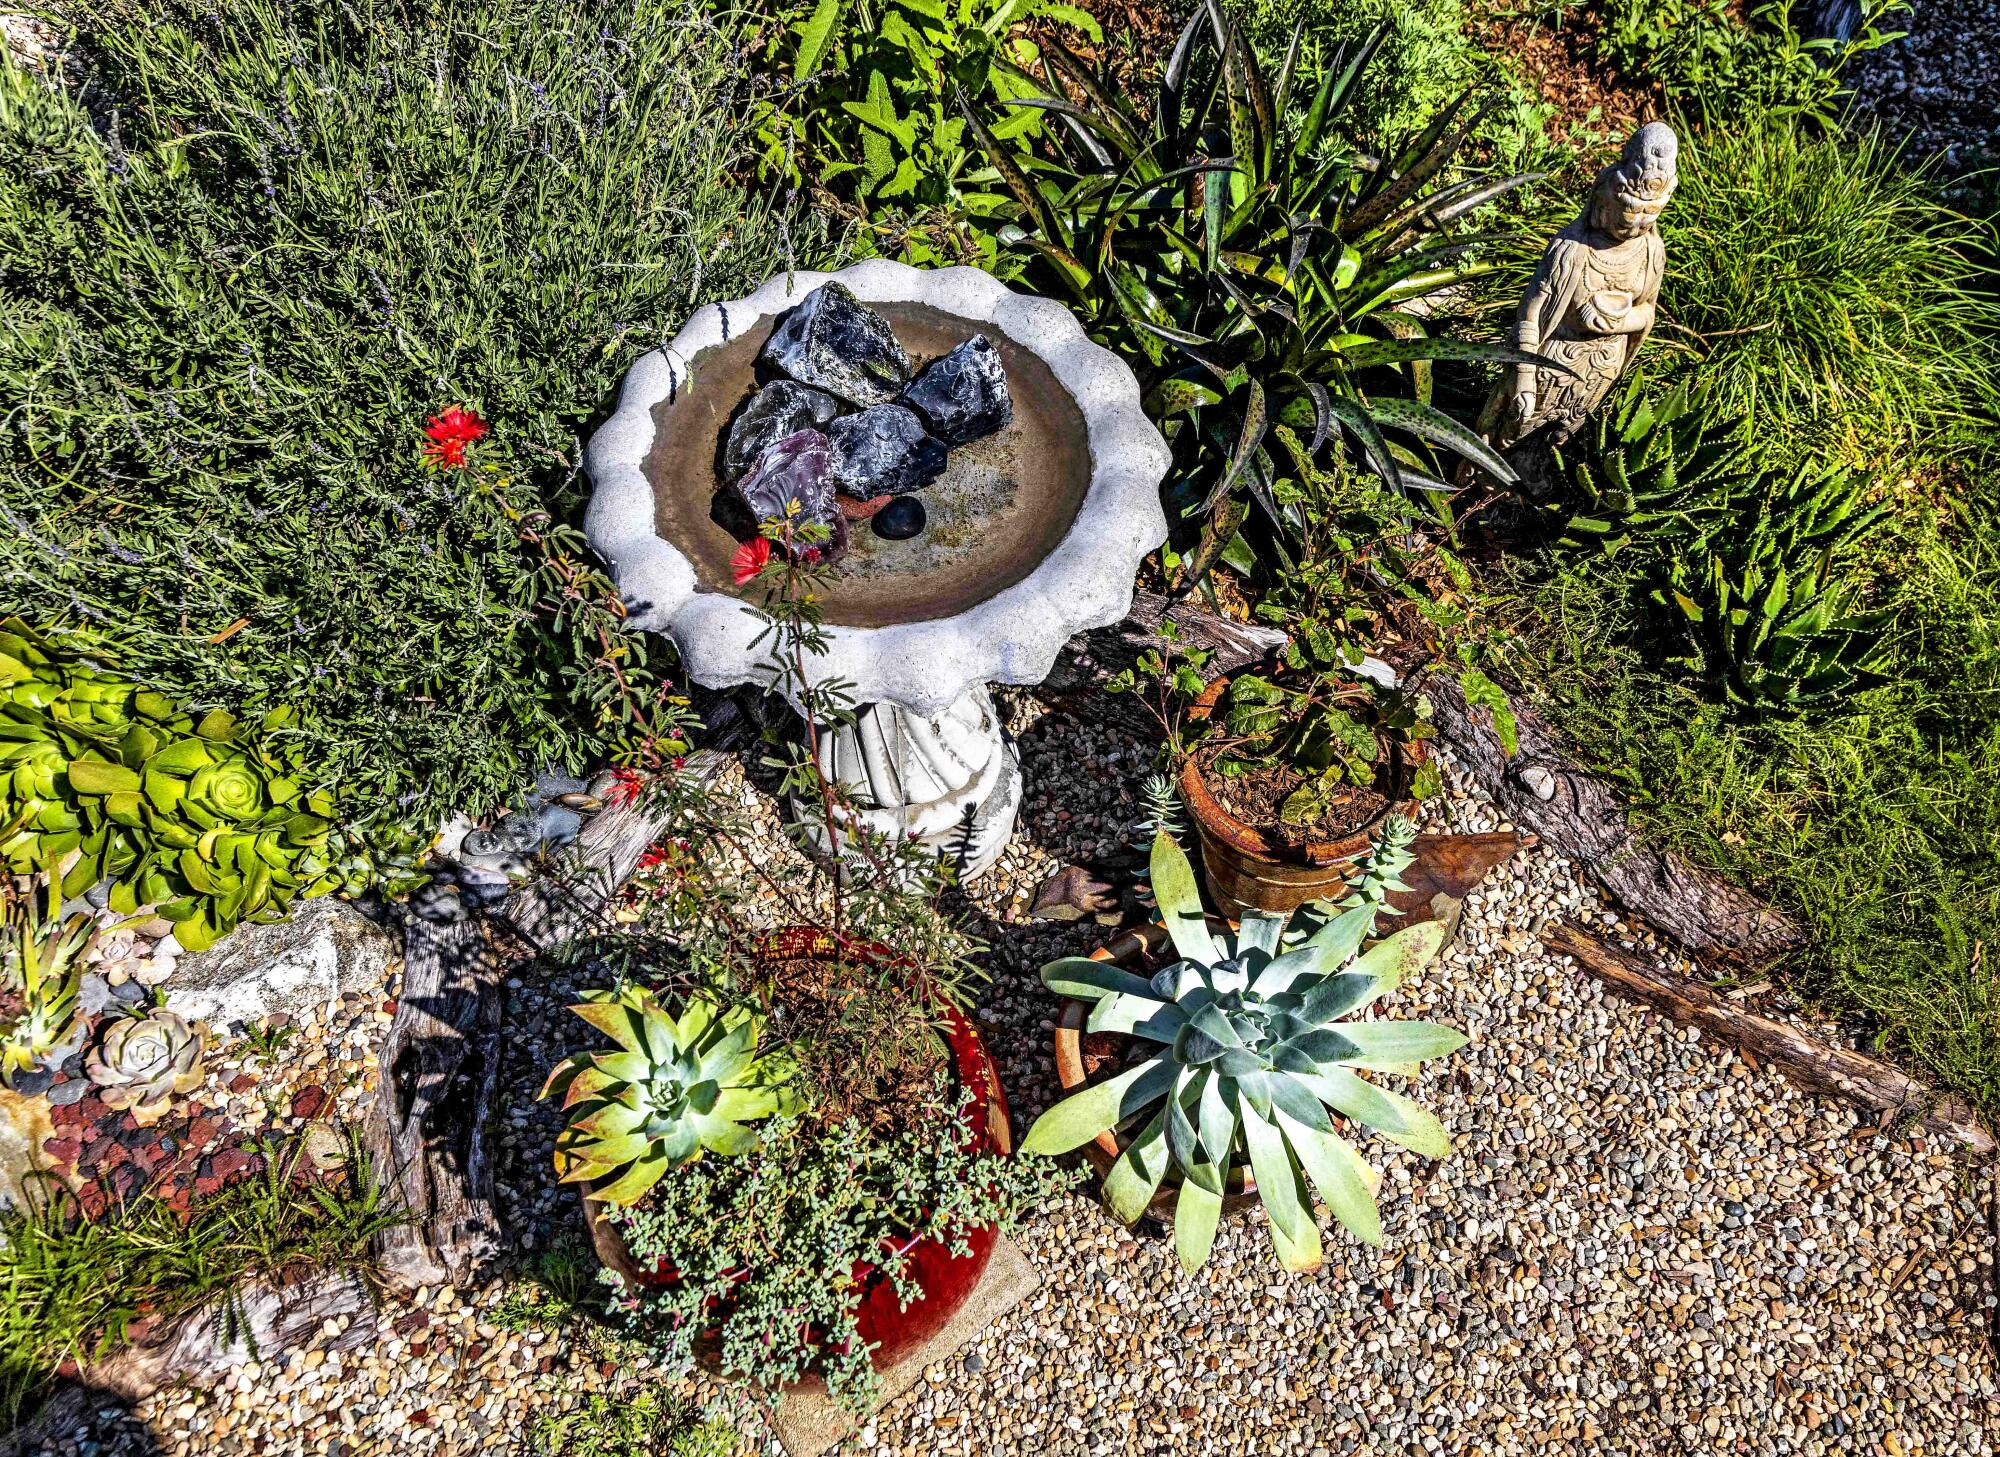 A birdbath surrounded by potted plants and pea gravel